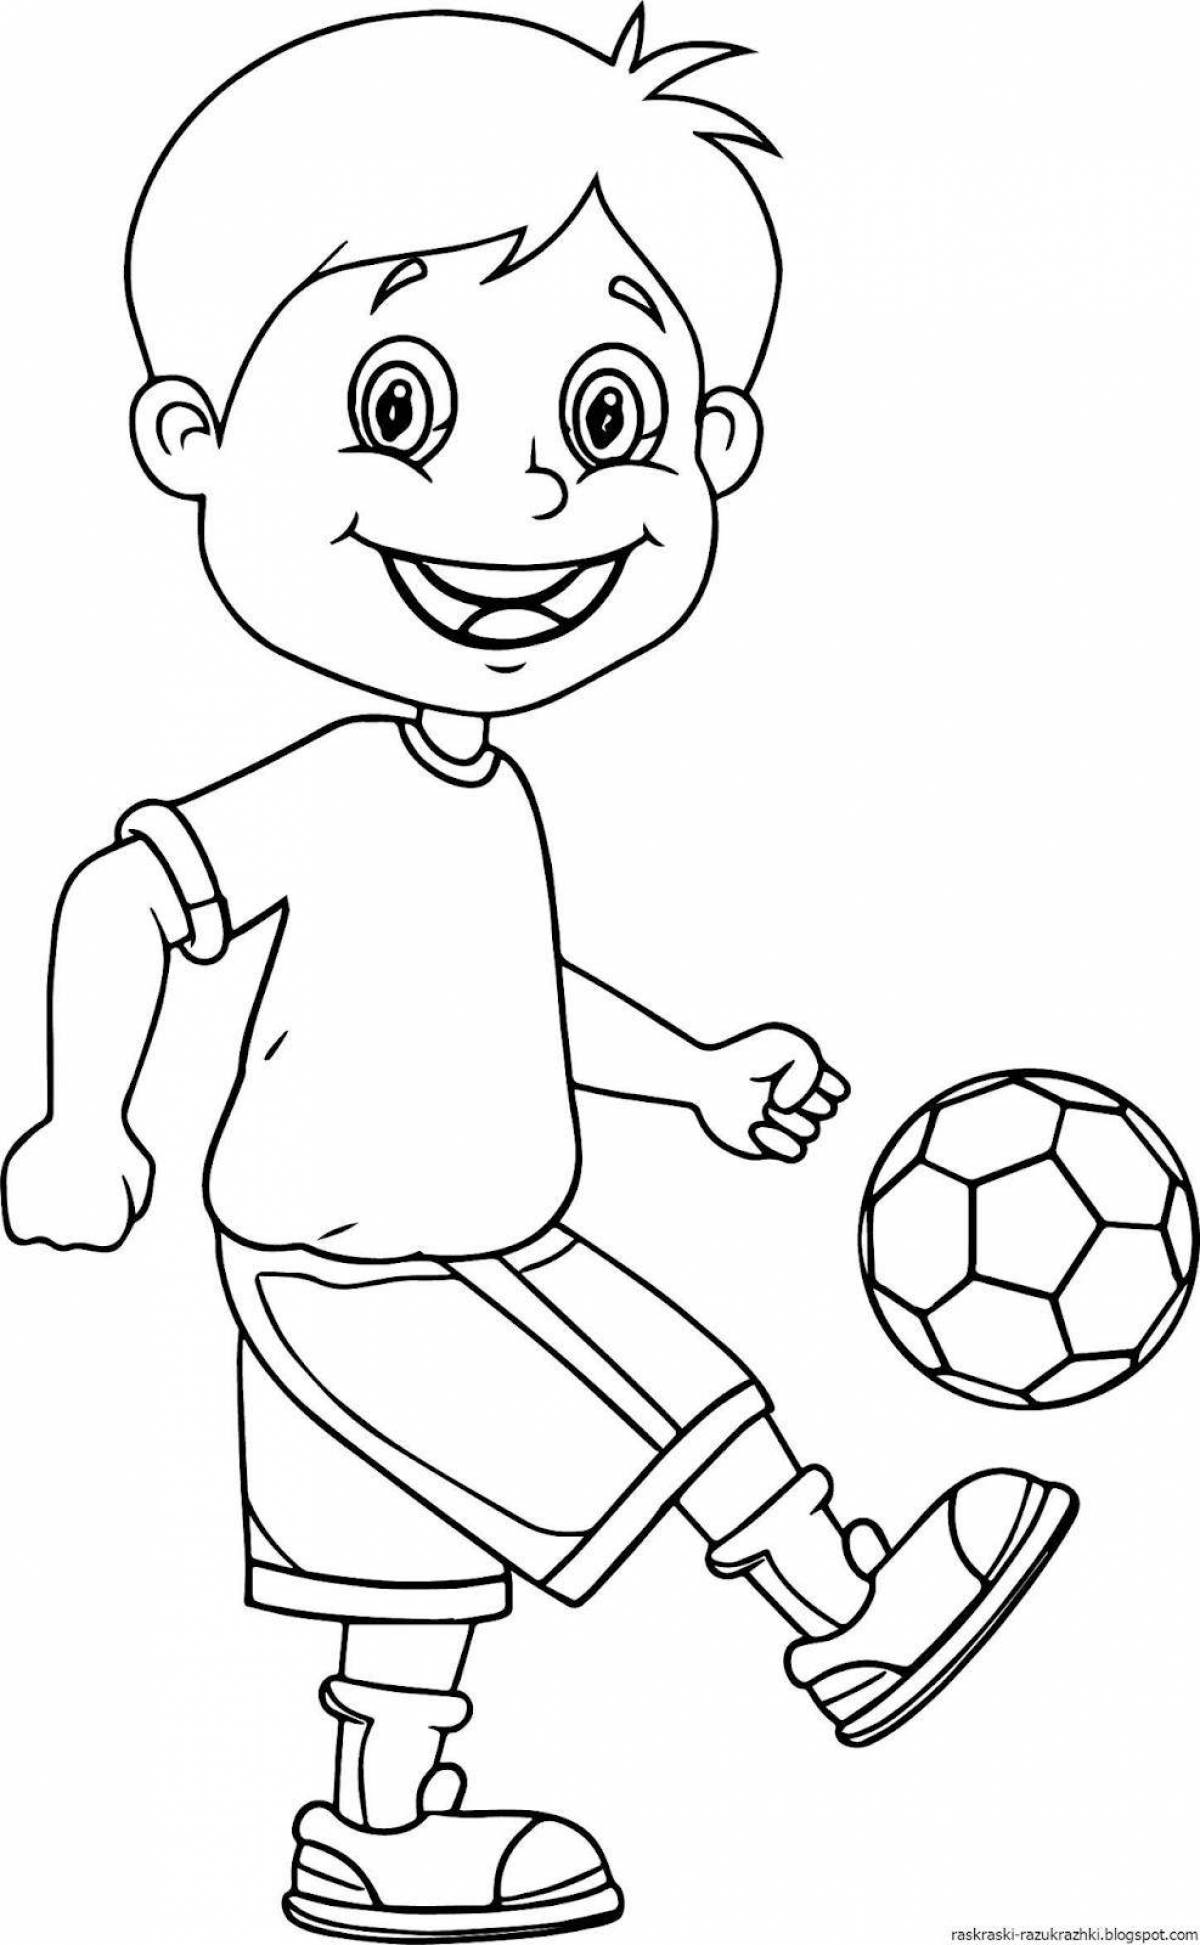 Glowing football coloring page